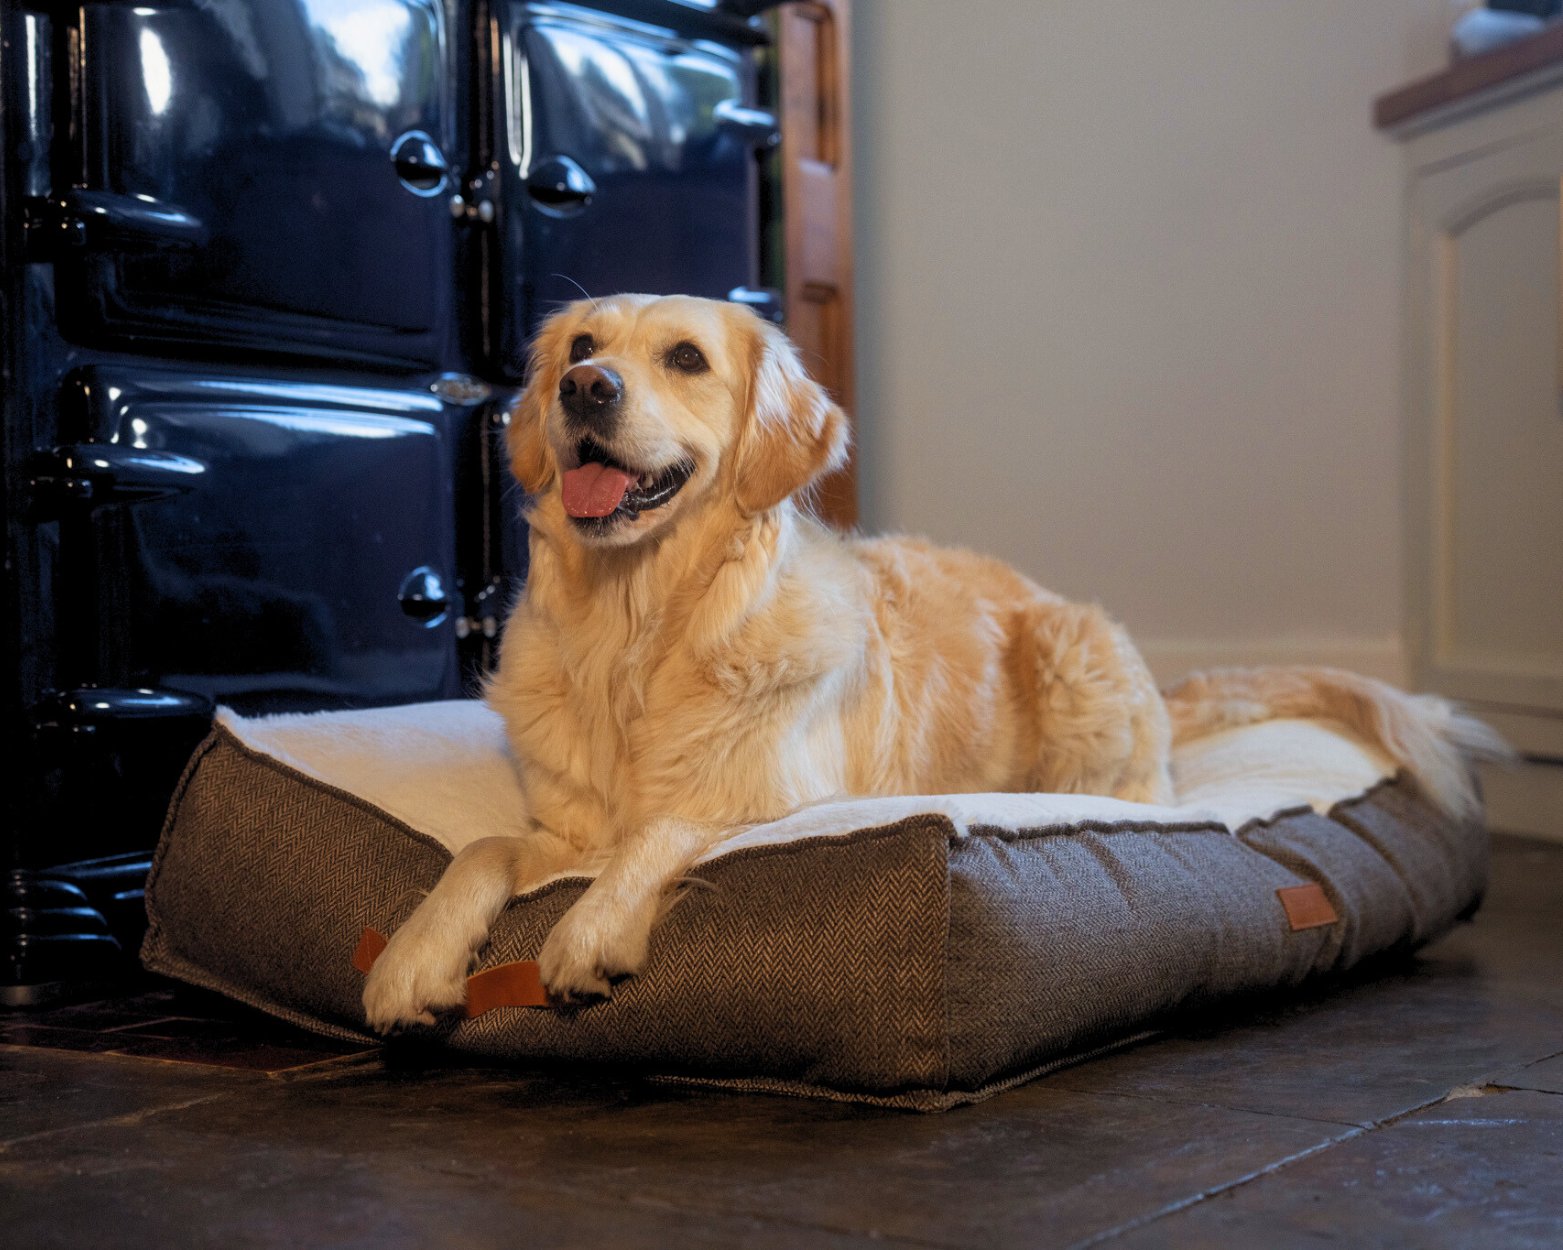 A golden retriever sits on a Lincoln pillow bed in front of the aga